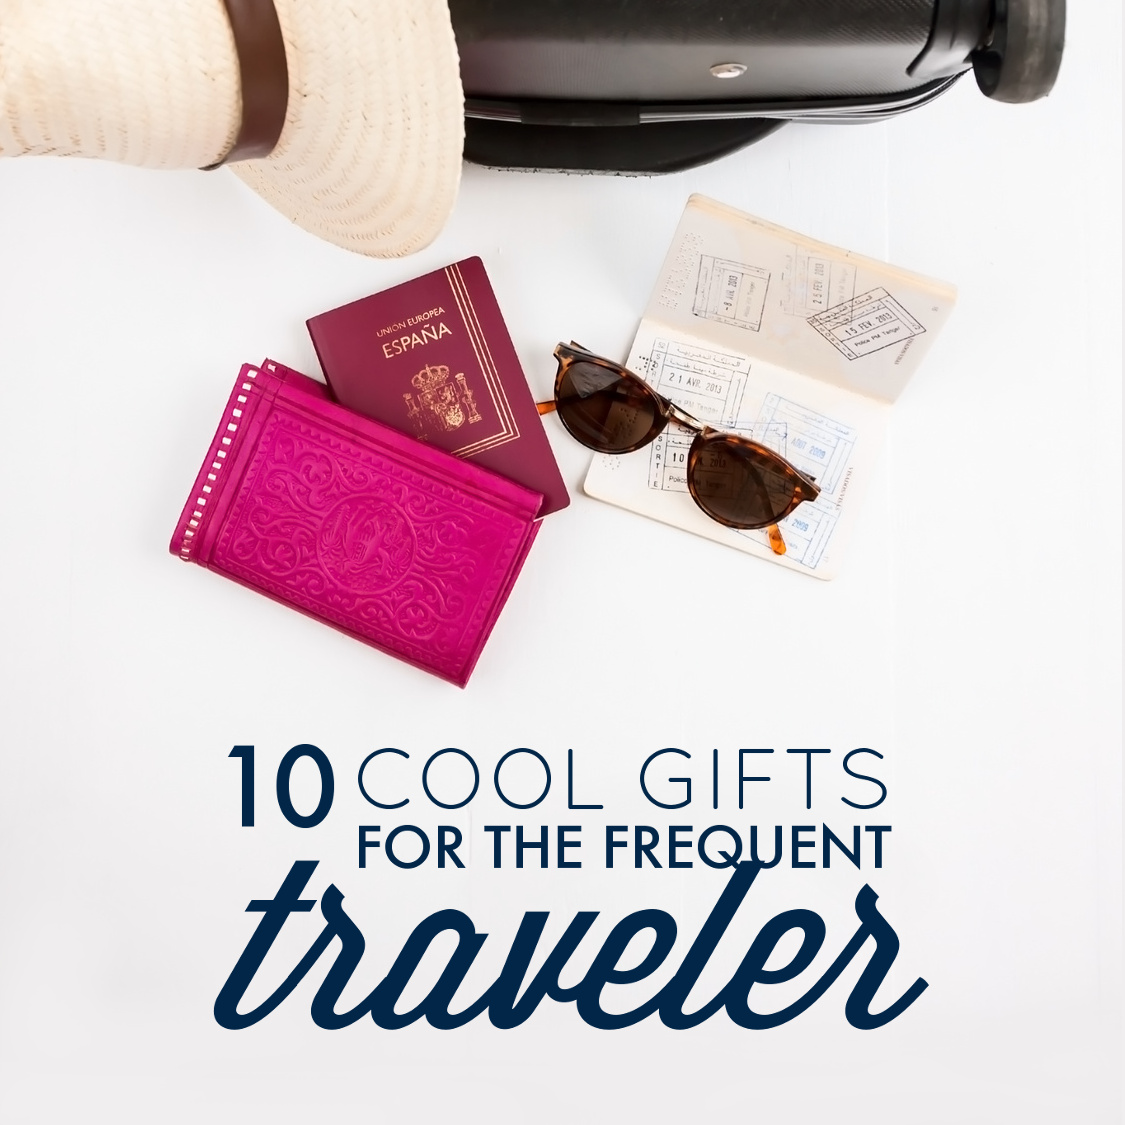 10 Cool Gifts for the Frequent Traveler